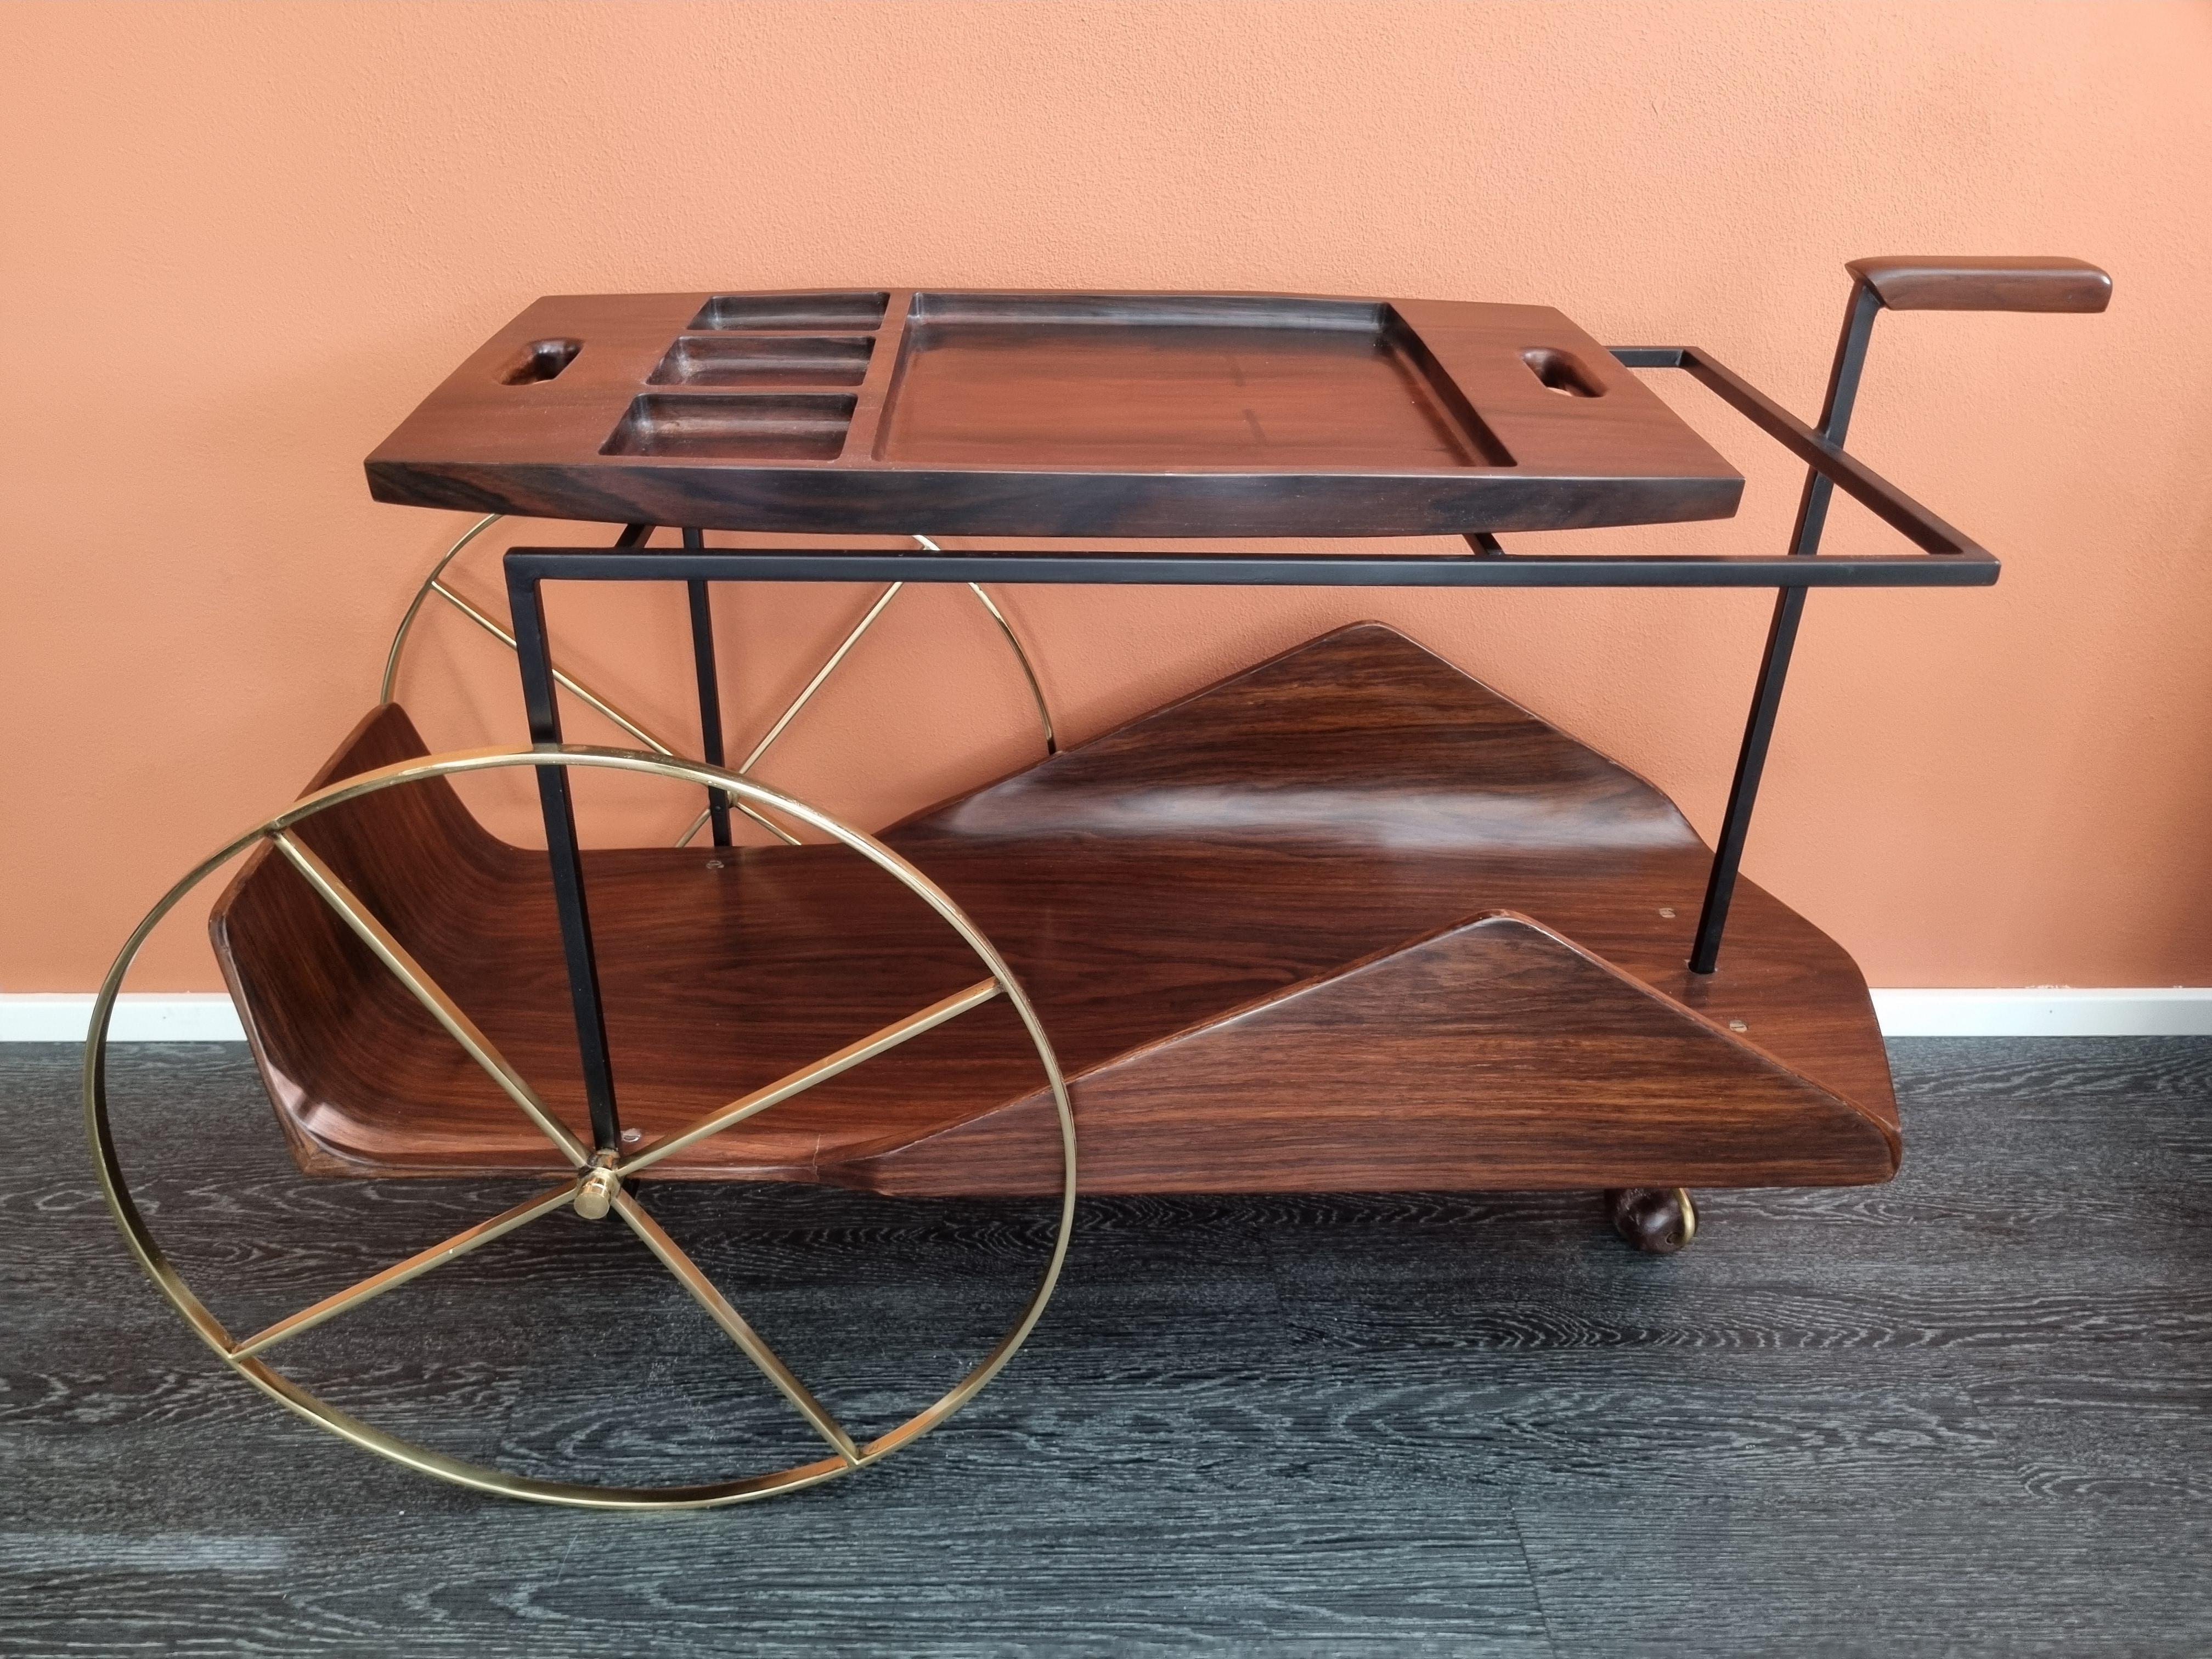 Designed by renowned Brazilian architect and designer Jorge Zalszupin, the JZ Tea Trolley, also known as the 